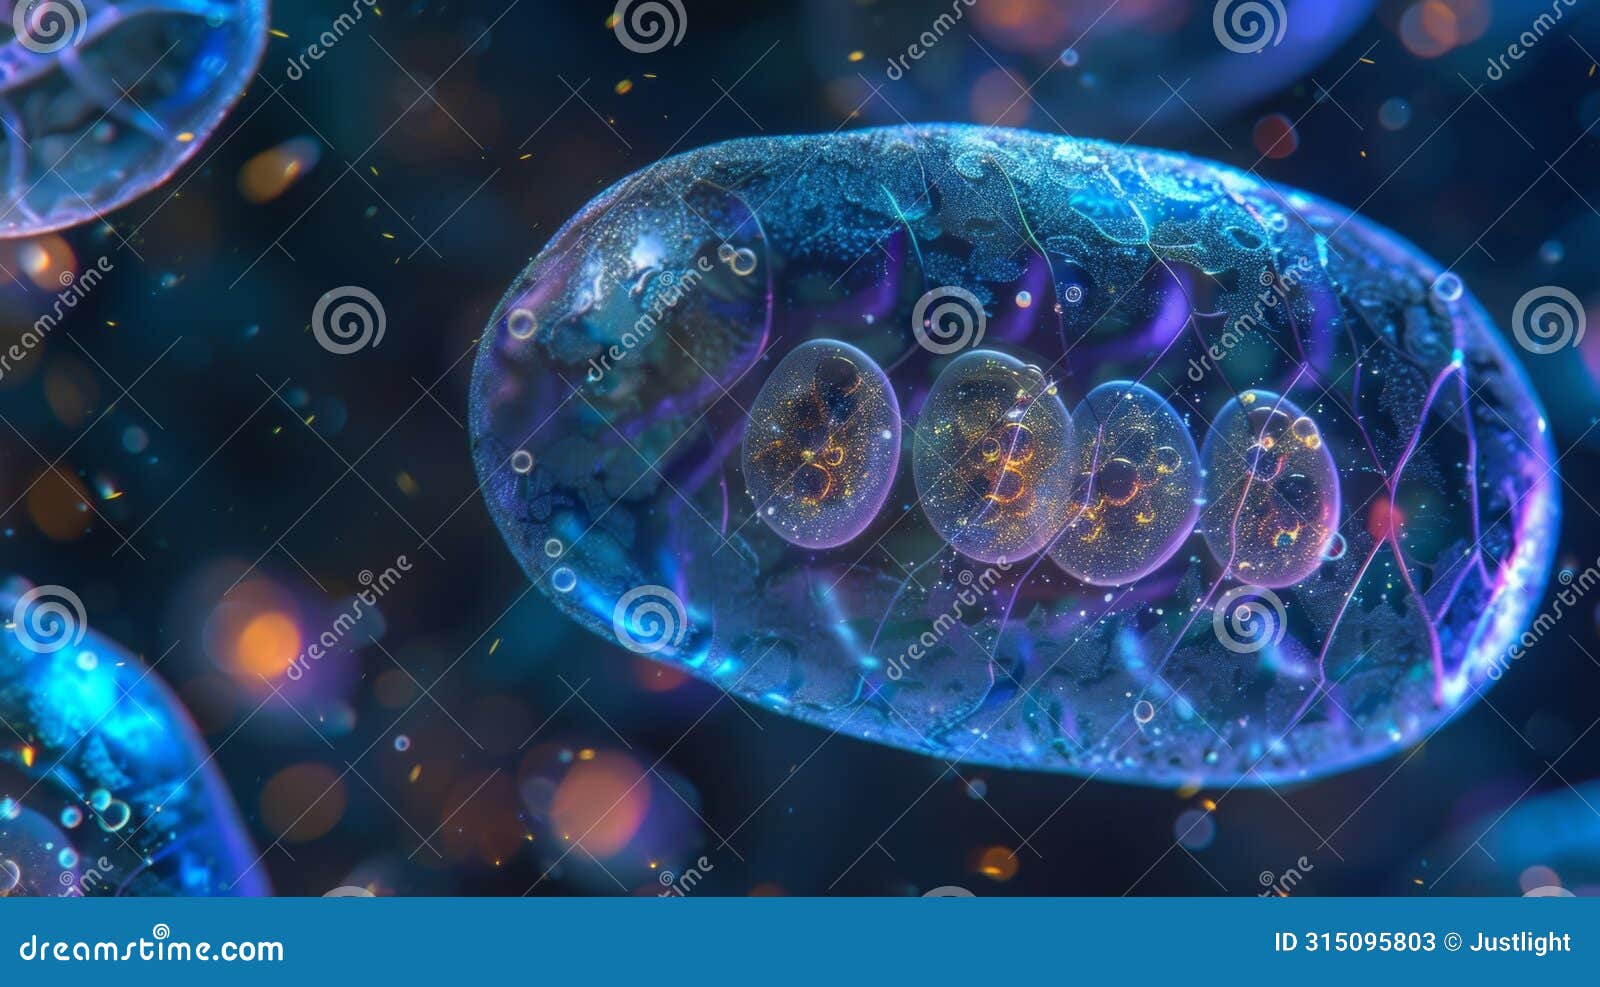 a closeup image of a single mitochondrion the powerhouse of the cell with its distinctive bean  and folded inner